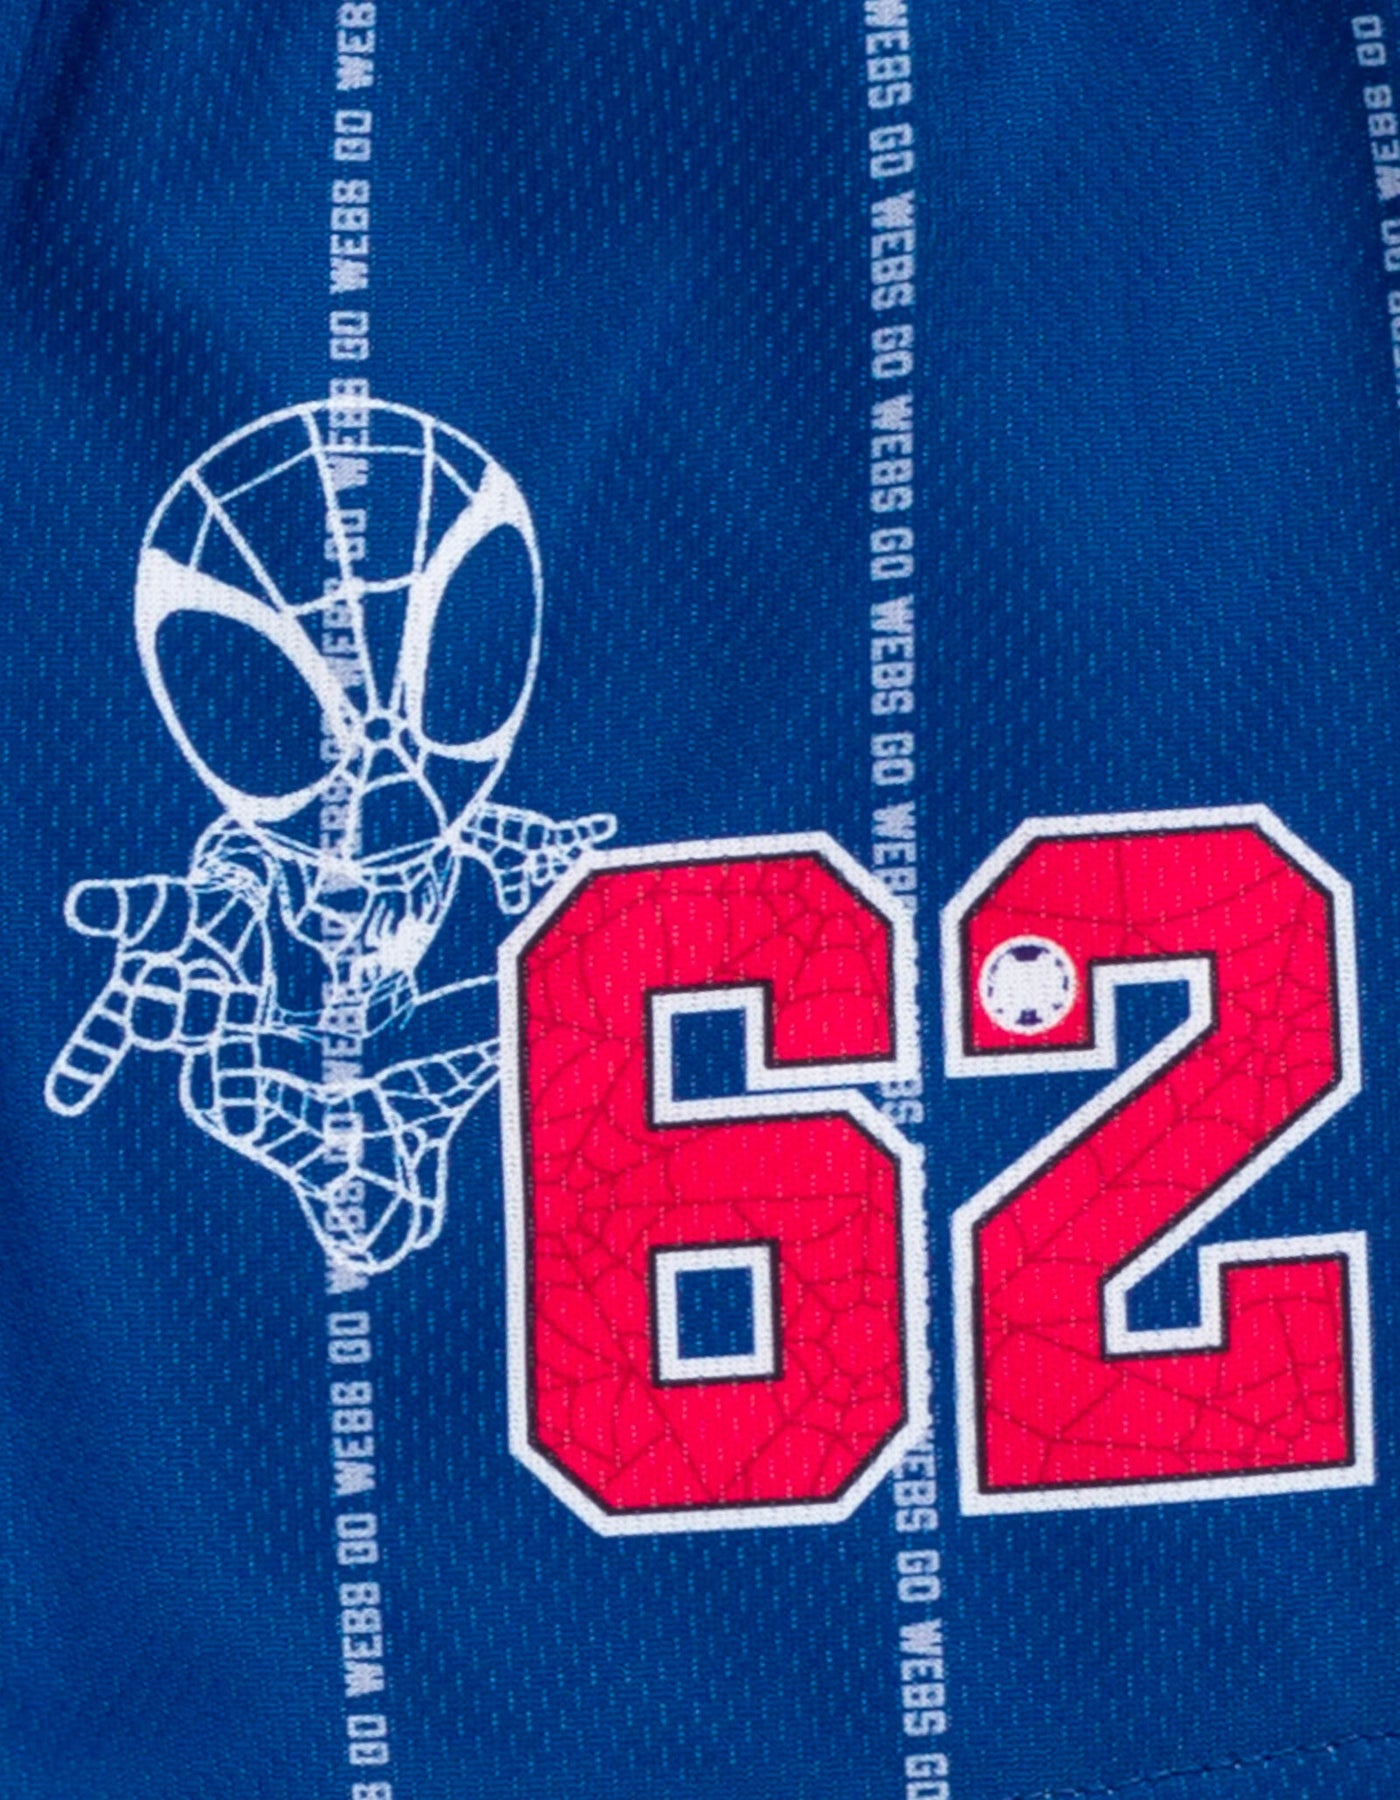 Marvel Spidey and His Amazing Friends Spider-Man Mesh Jersey Athletic Tank Top Basketball Shorts Outfit Set